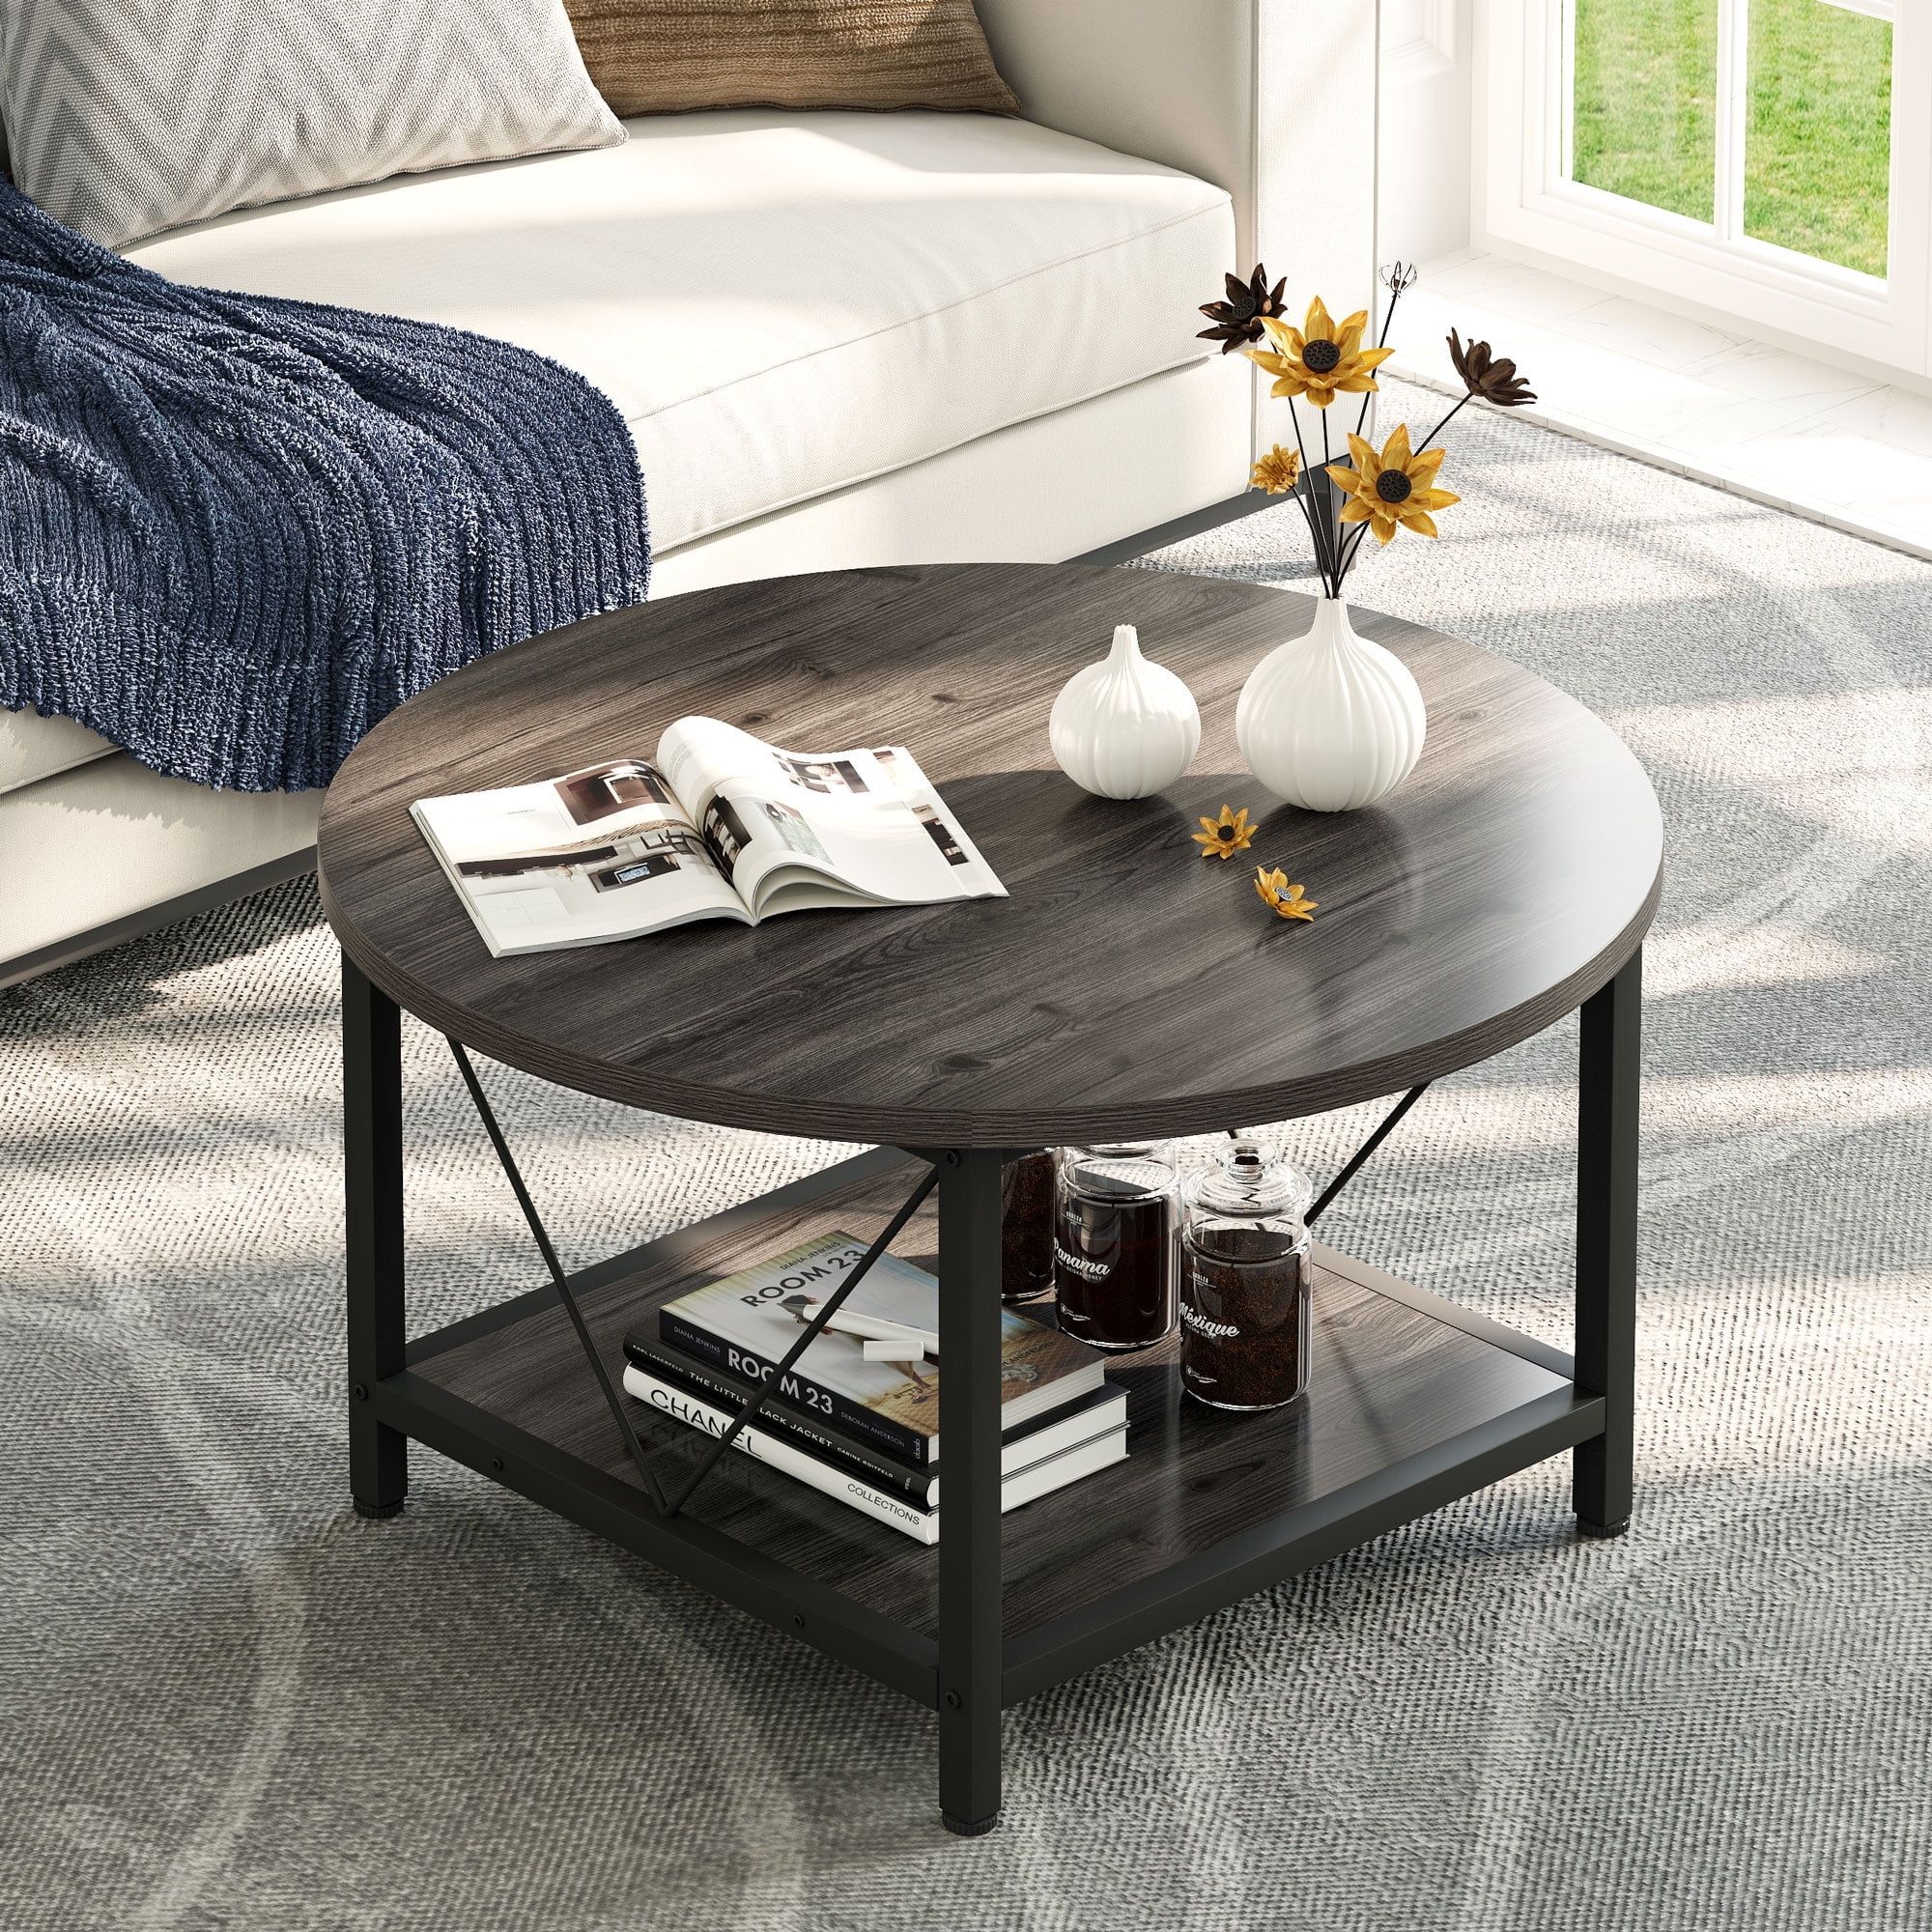 Dextrus Round Coffee Table With Storage, Rustic Living Room Tables With  Sturdy Metal Legs, Dark Gray – Walmart Throughout Coffee Tables With Metal Legs (View 4 of 15)